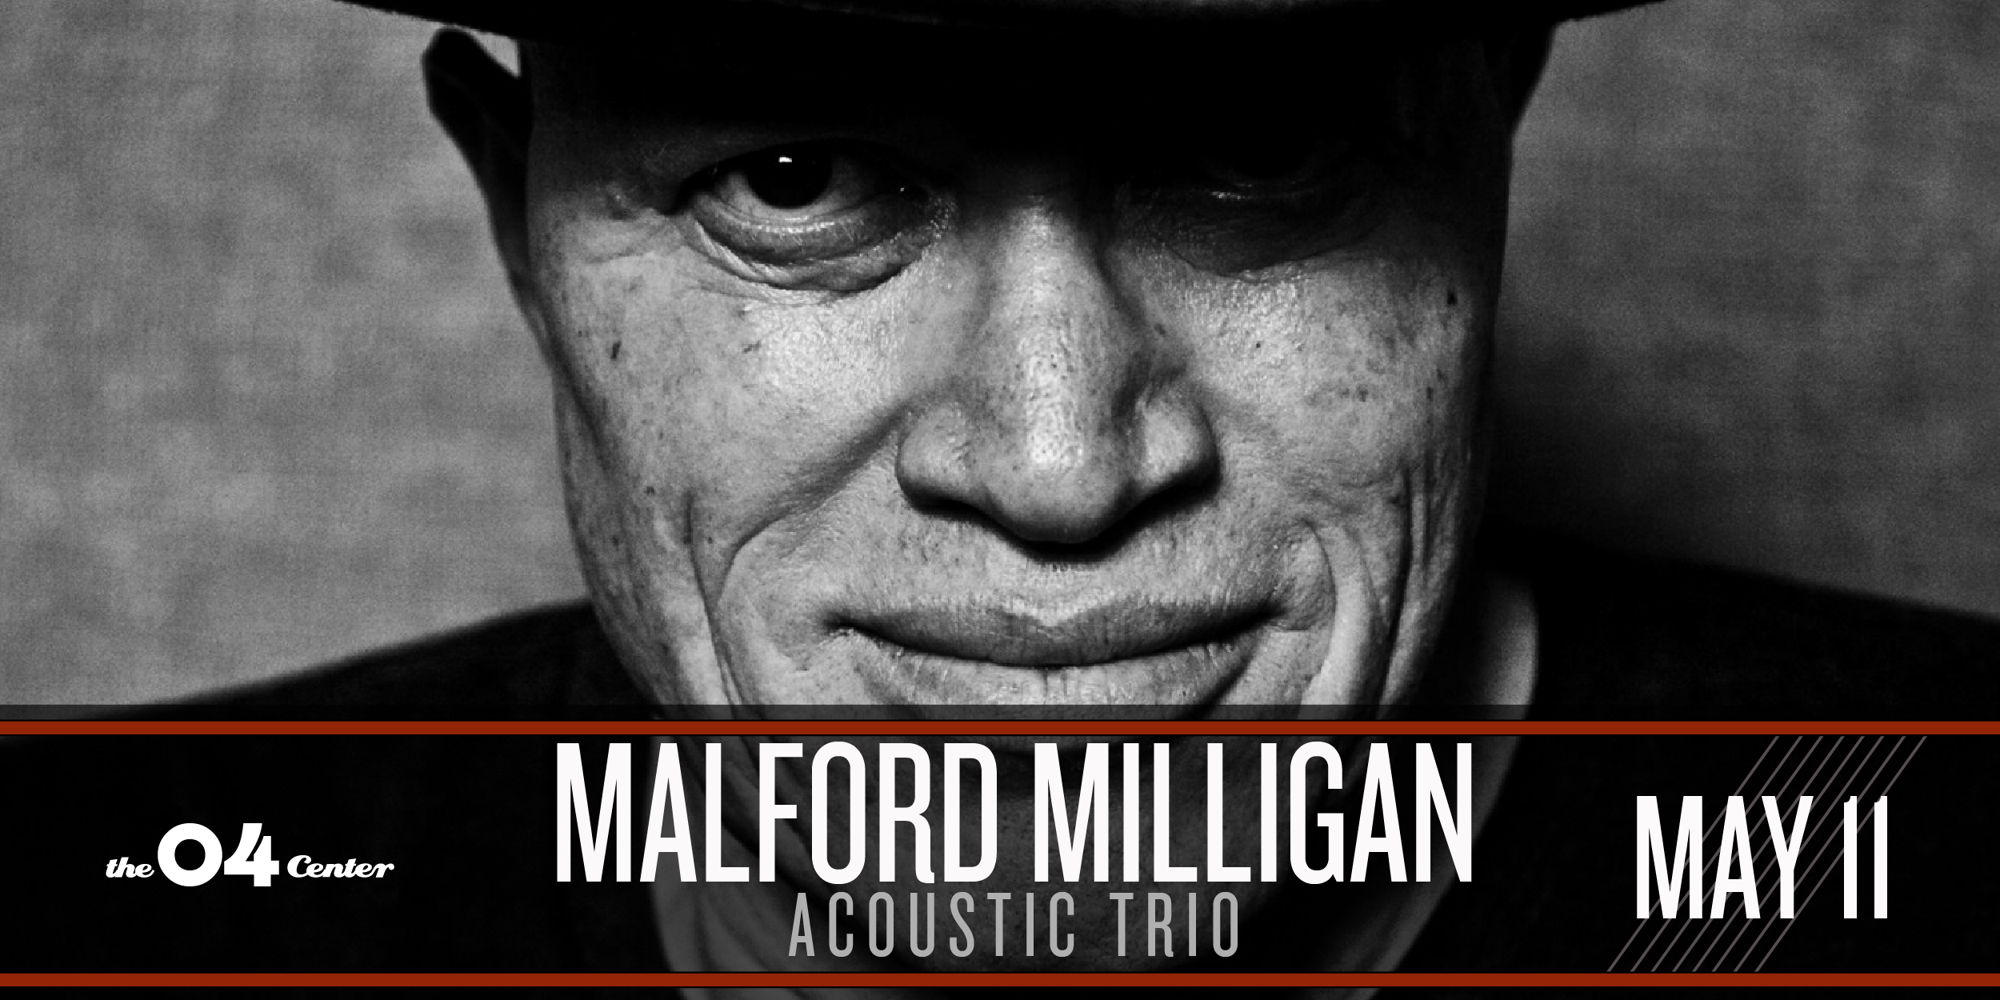 Malford Milligan (Acoustic Trio) with special guest Cari Hutson Trio promotional image